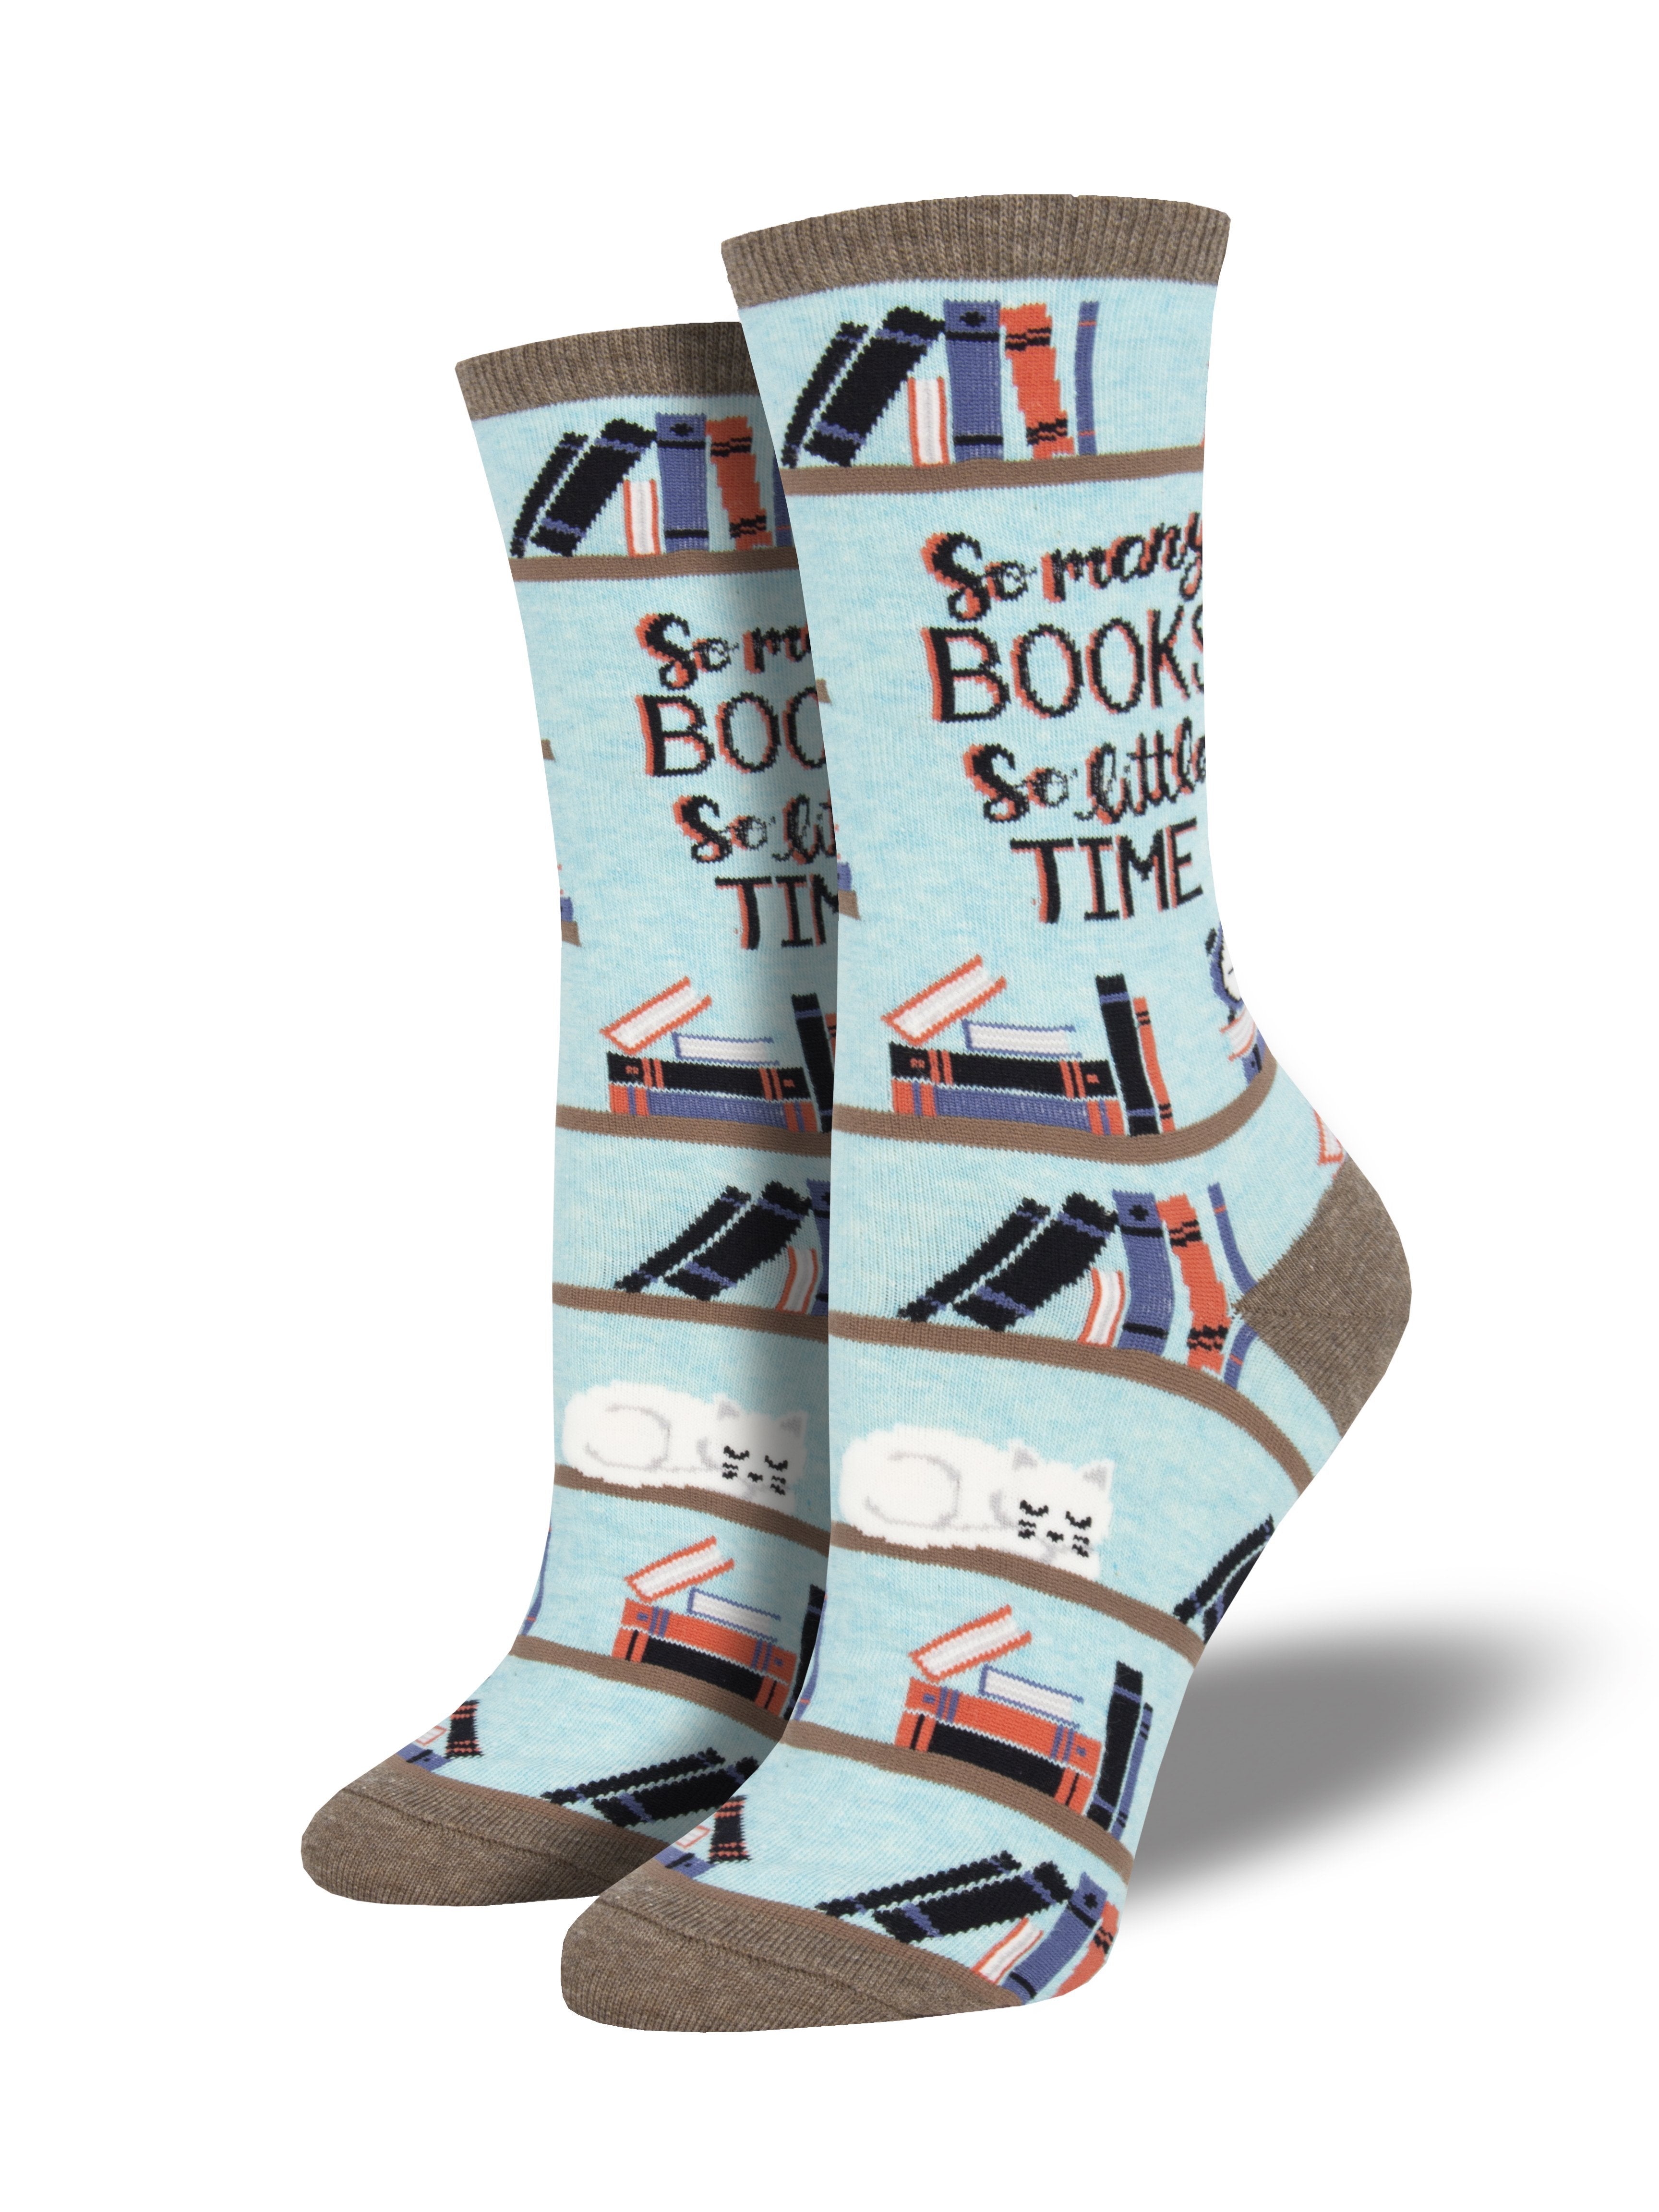 Women's "Time For A Good Book" Socks